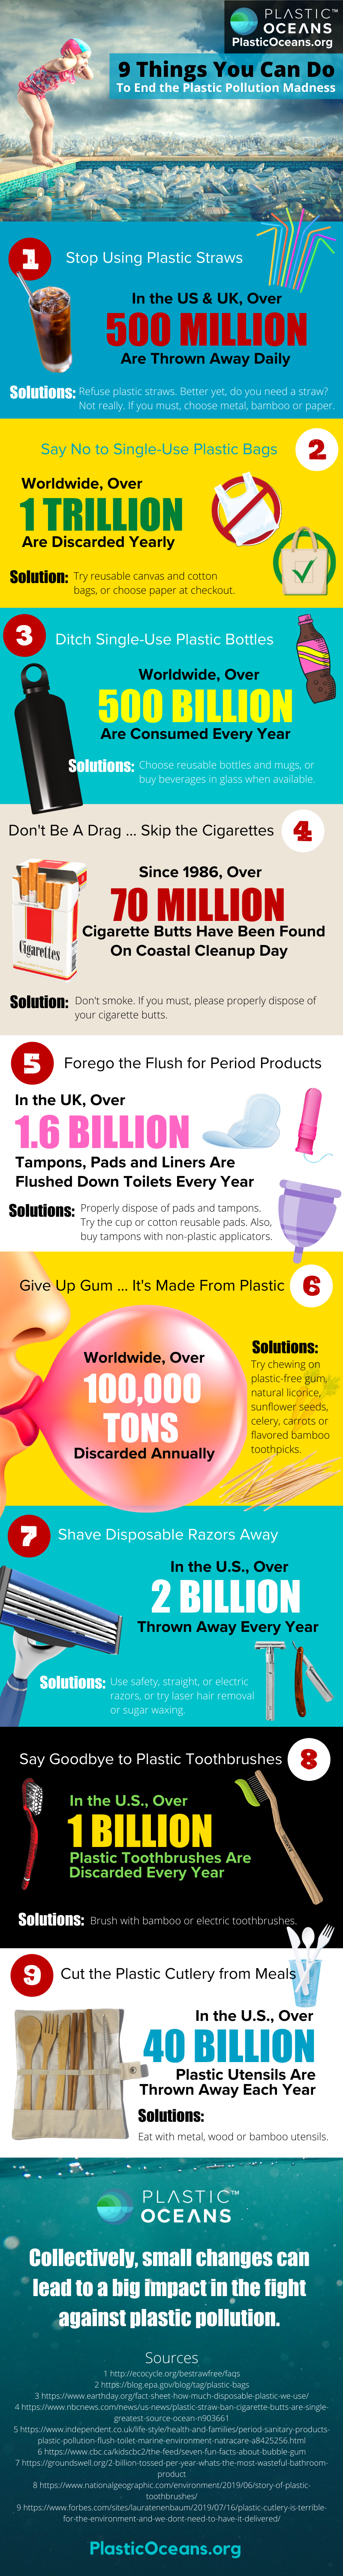 Plastic Pollution 9 tips infographic